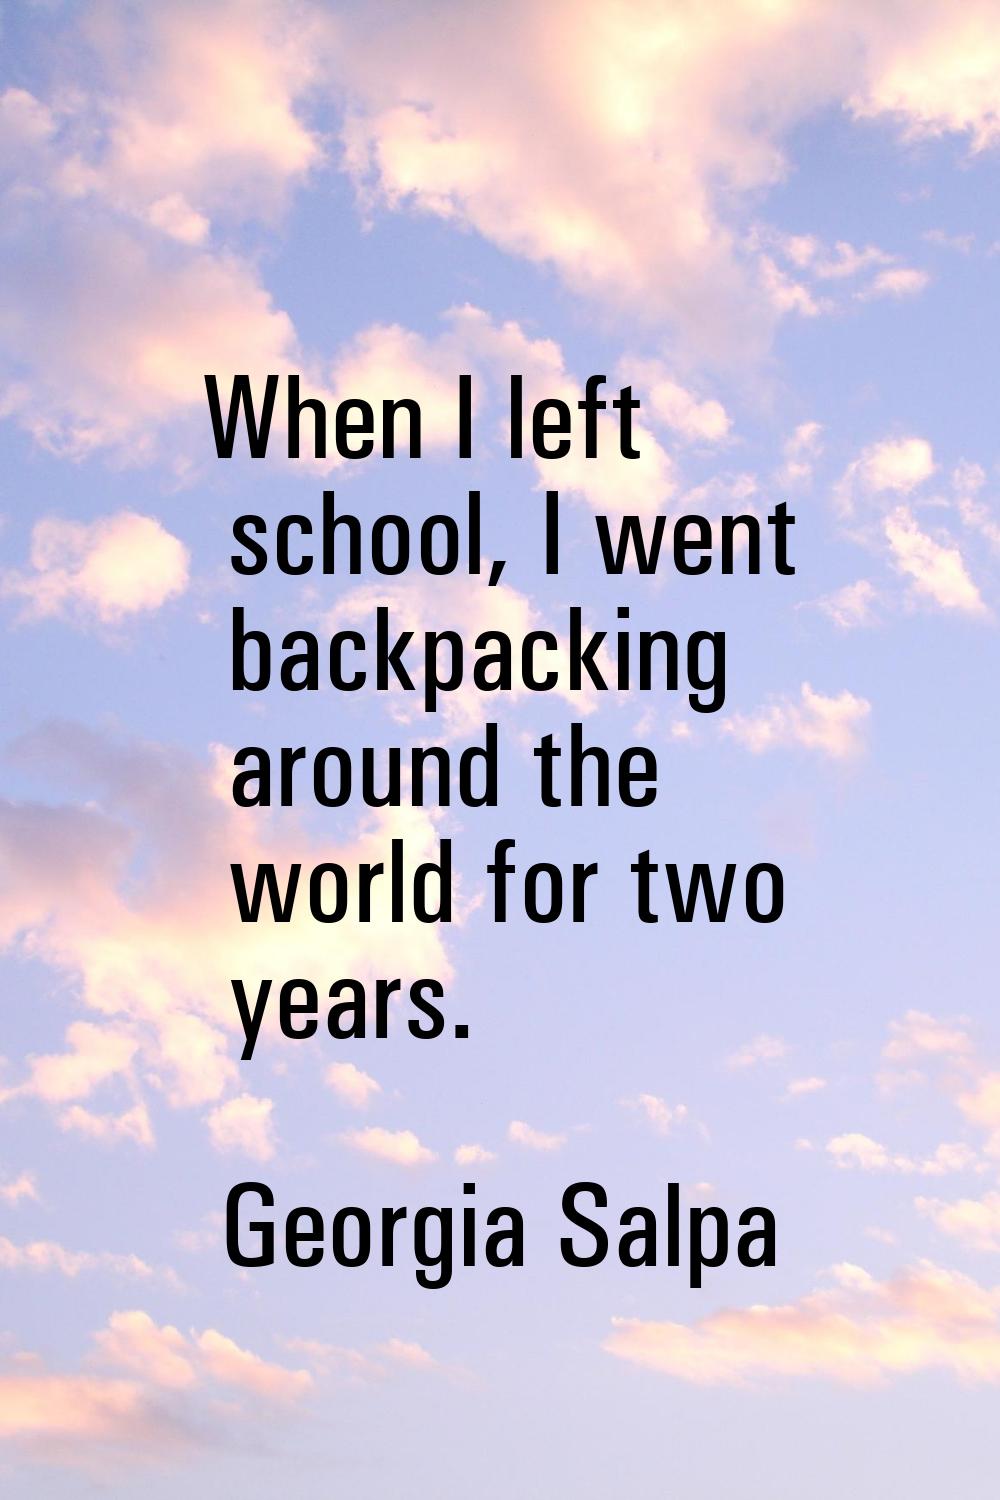 When I left school, I went backpacking around the world for two years.